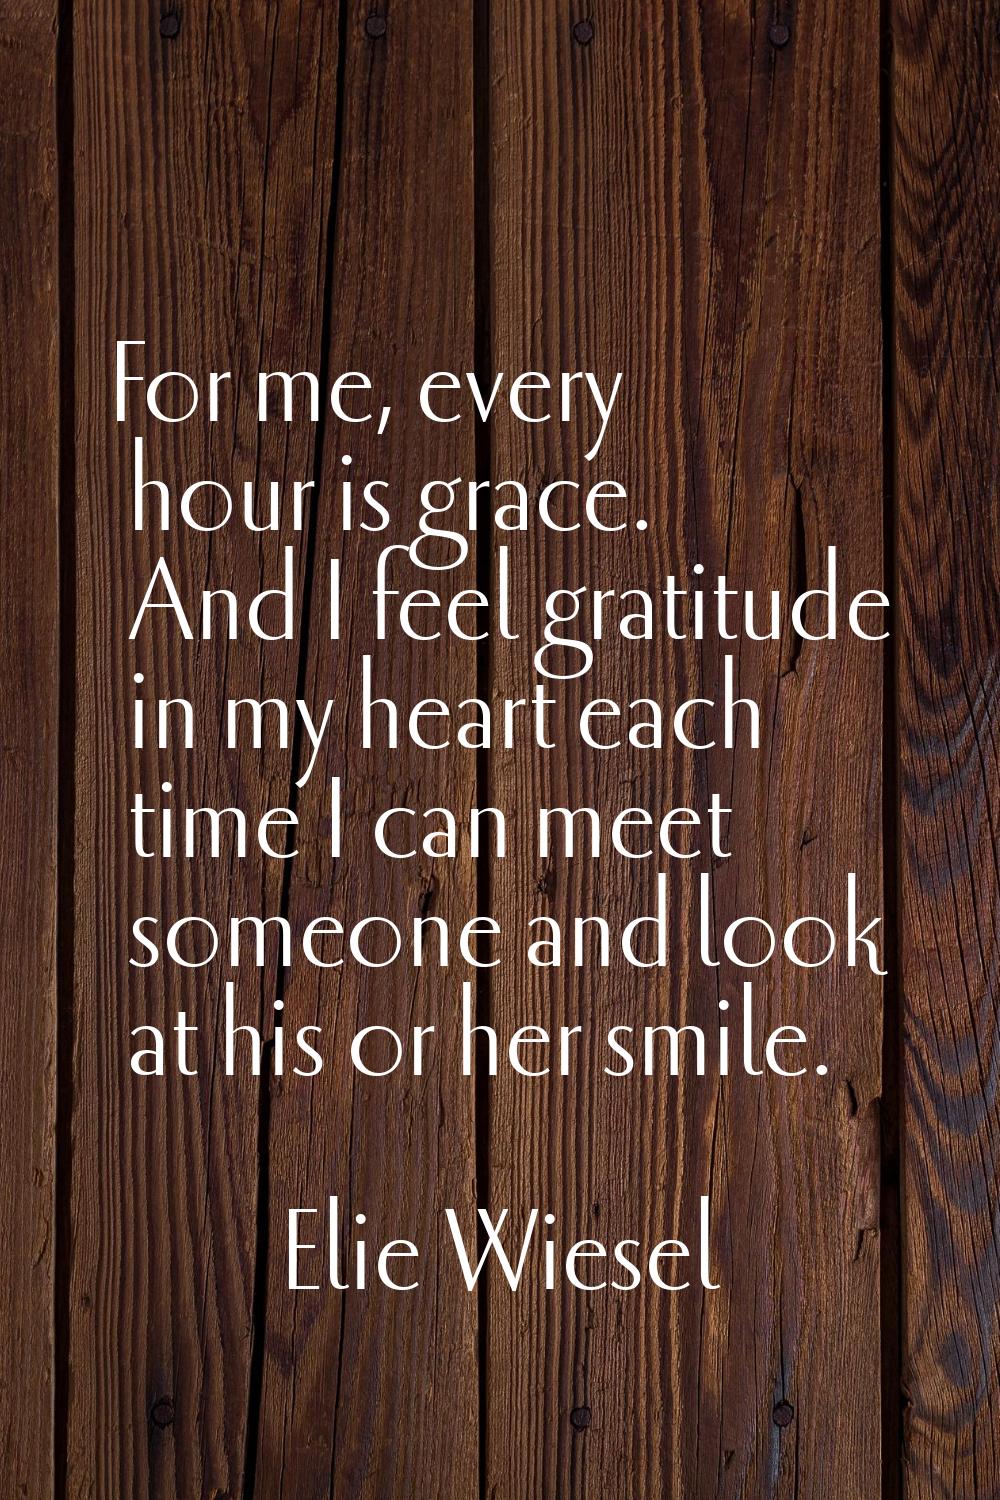 For me, every hour is grace. And I feel gratitude in my heart each time I can meet someone and look